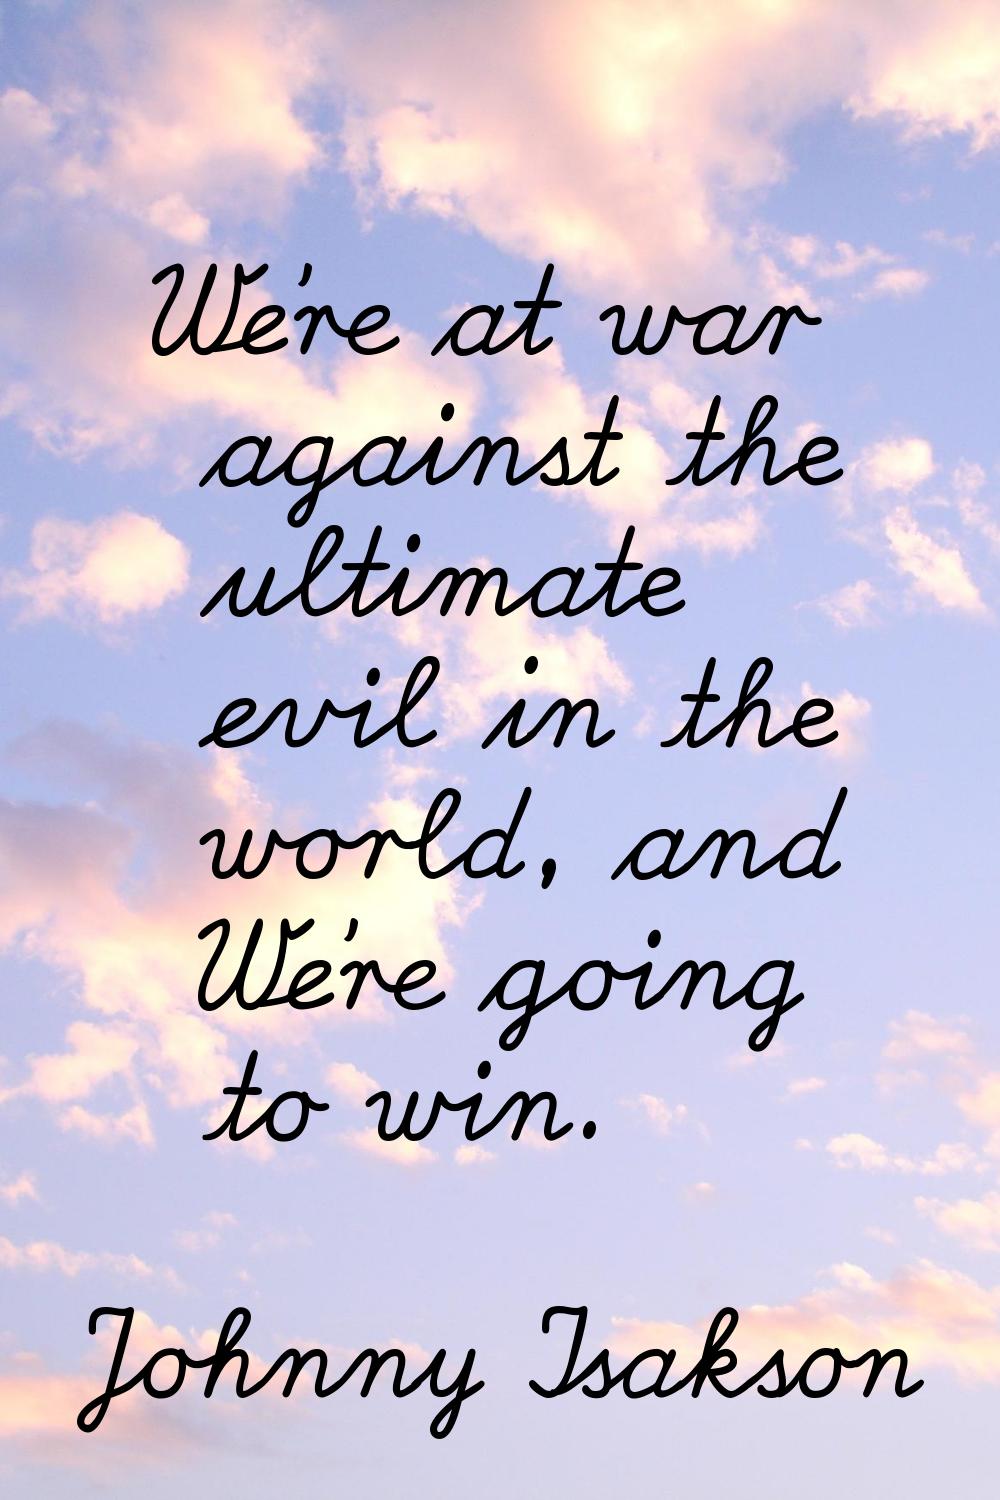 We're at war against the ultimate evil in the world, and We're going to win.